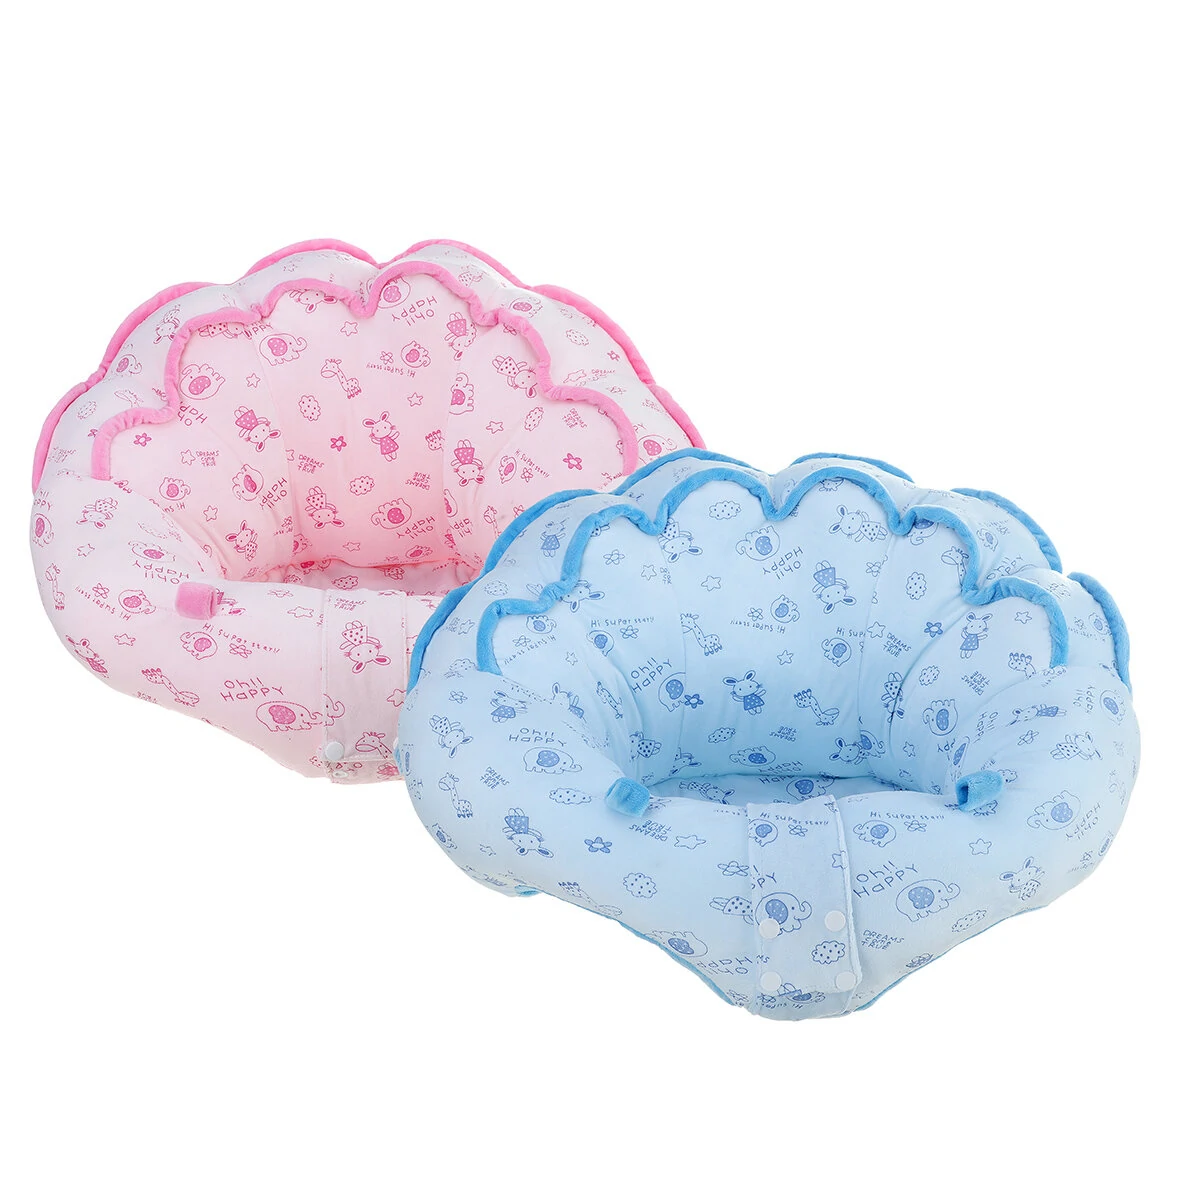 Blue pink color kids baby 360° comfortable support seat plush sofa learning to sit chair cushion toy for kids gift